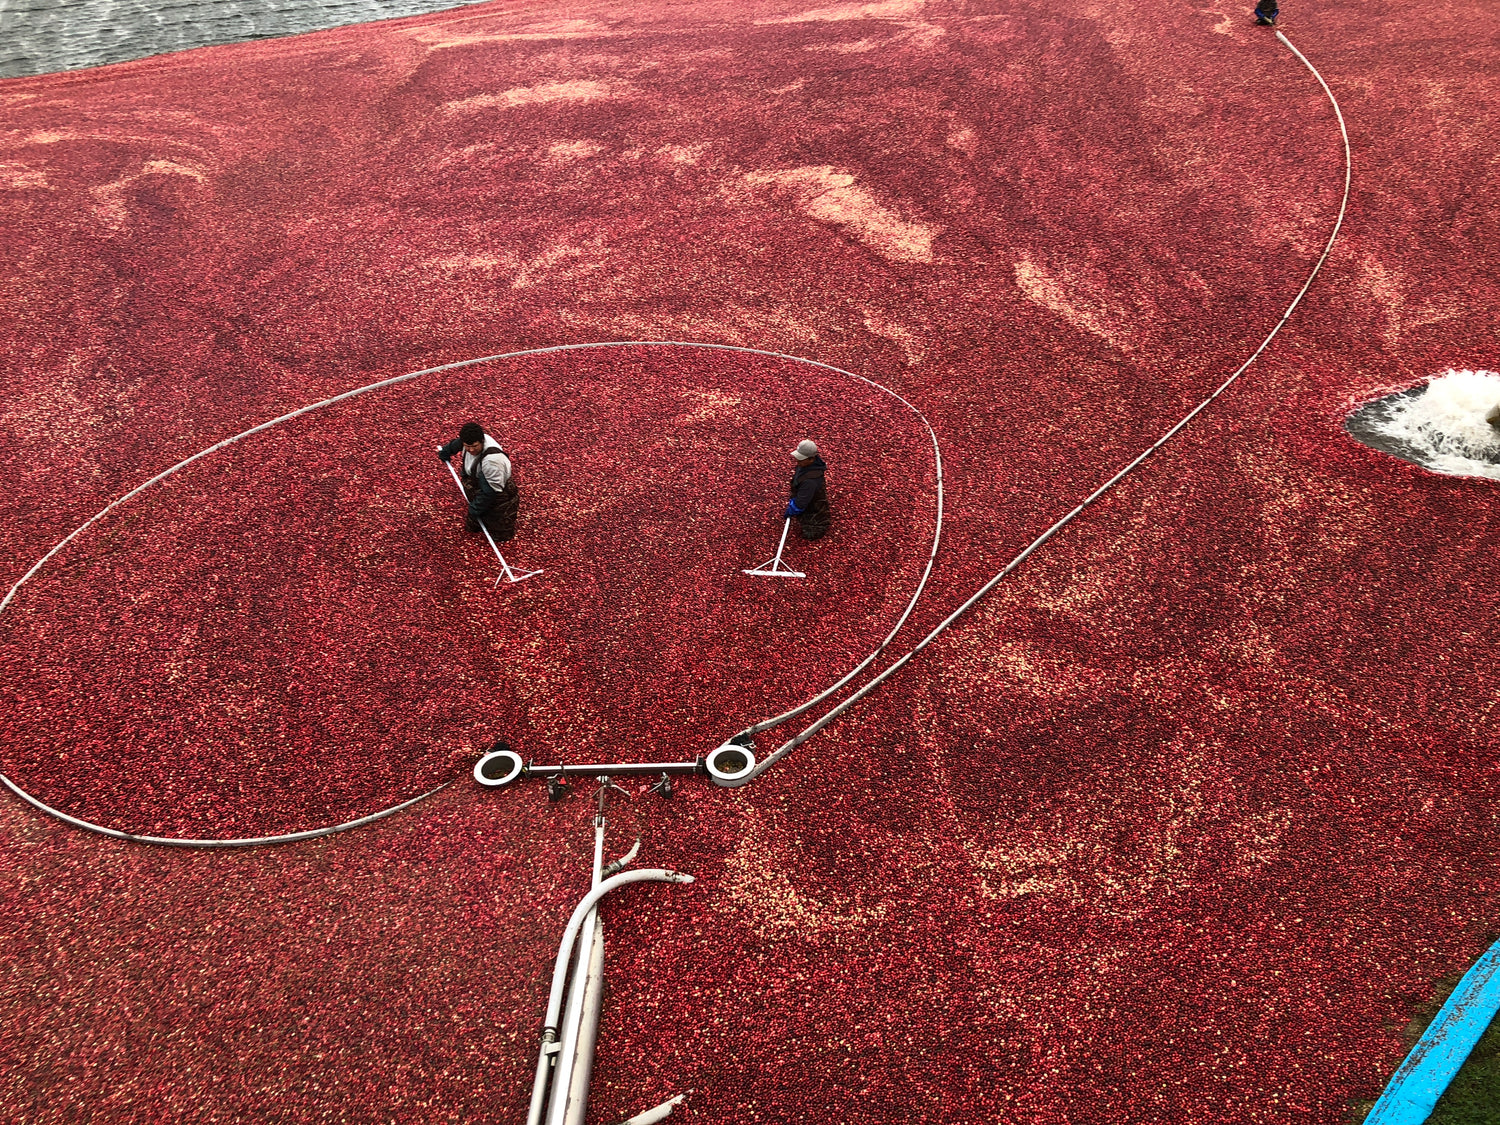 How are cranberries harvested?